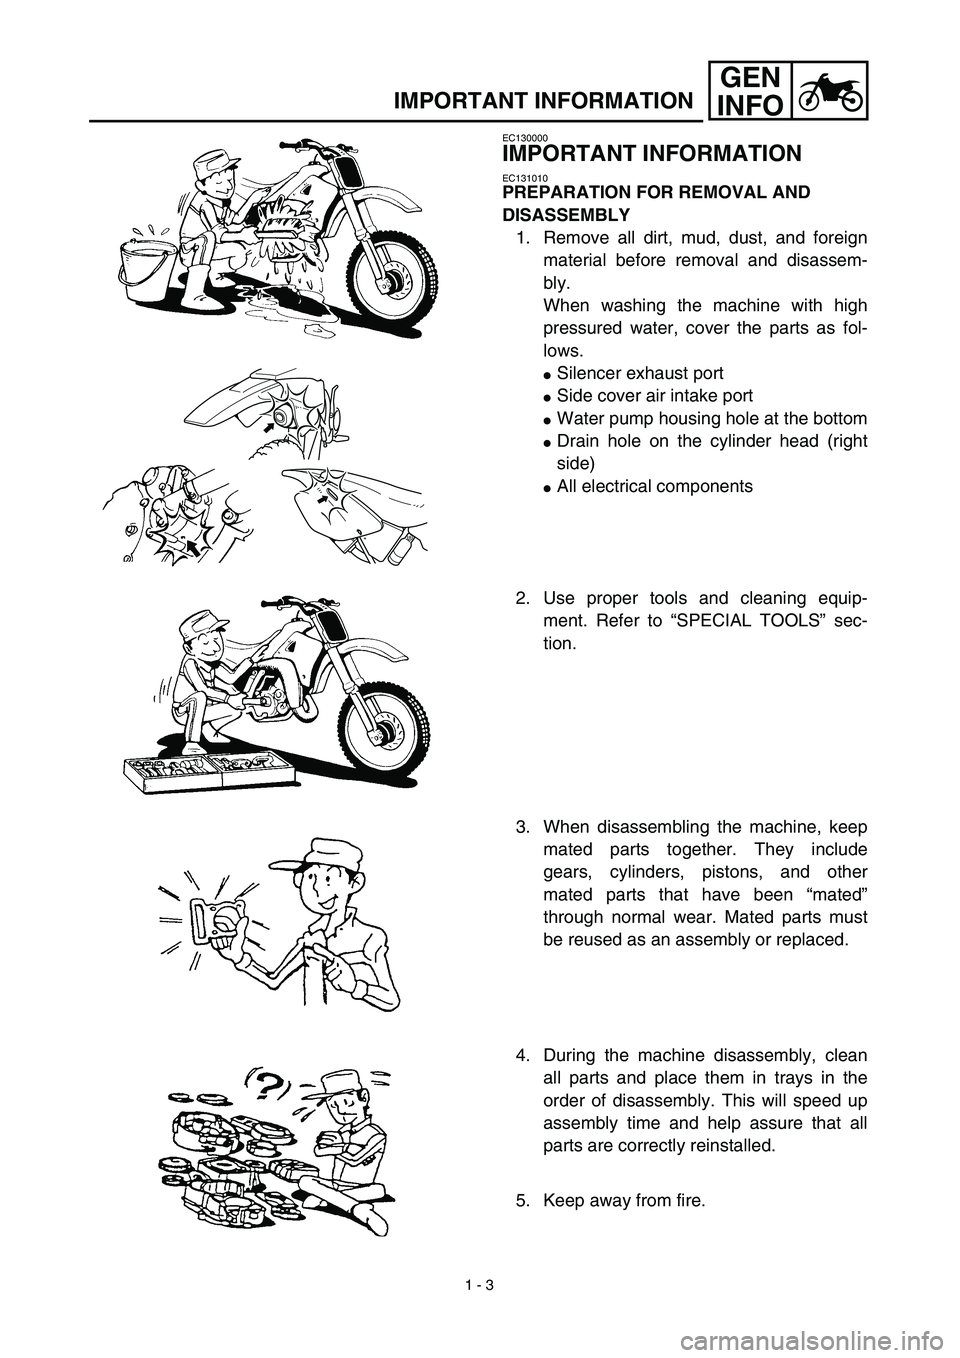 YAMAHA WR 450F 2003  Owners Manual  
1 - 3
GEN
INFO
 
IMPORTANT INFORMATION 
EC130000 
IMPORTANT INFORMATION 
EC131010 
PREPARATION FOR REMOVAL AND 
DISASSEMBLY 
1. Remove all dirt, mud, dust, and foreign
material before removal and di